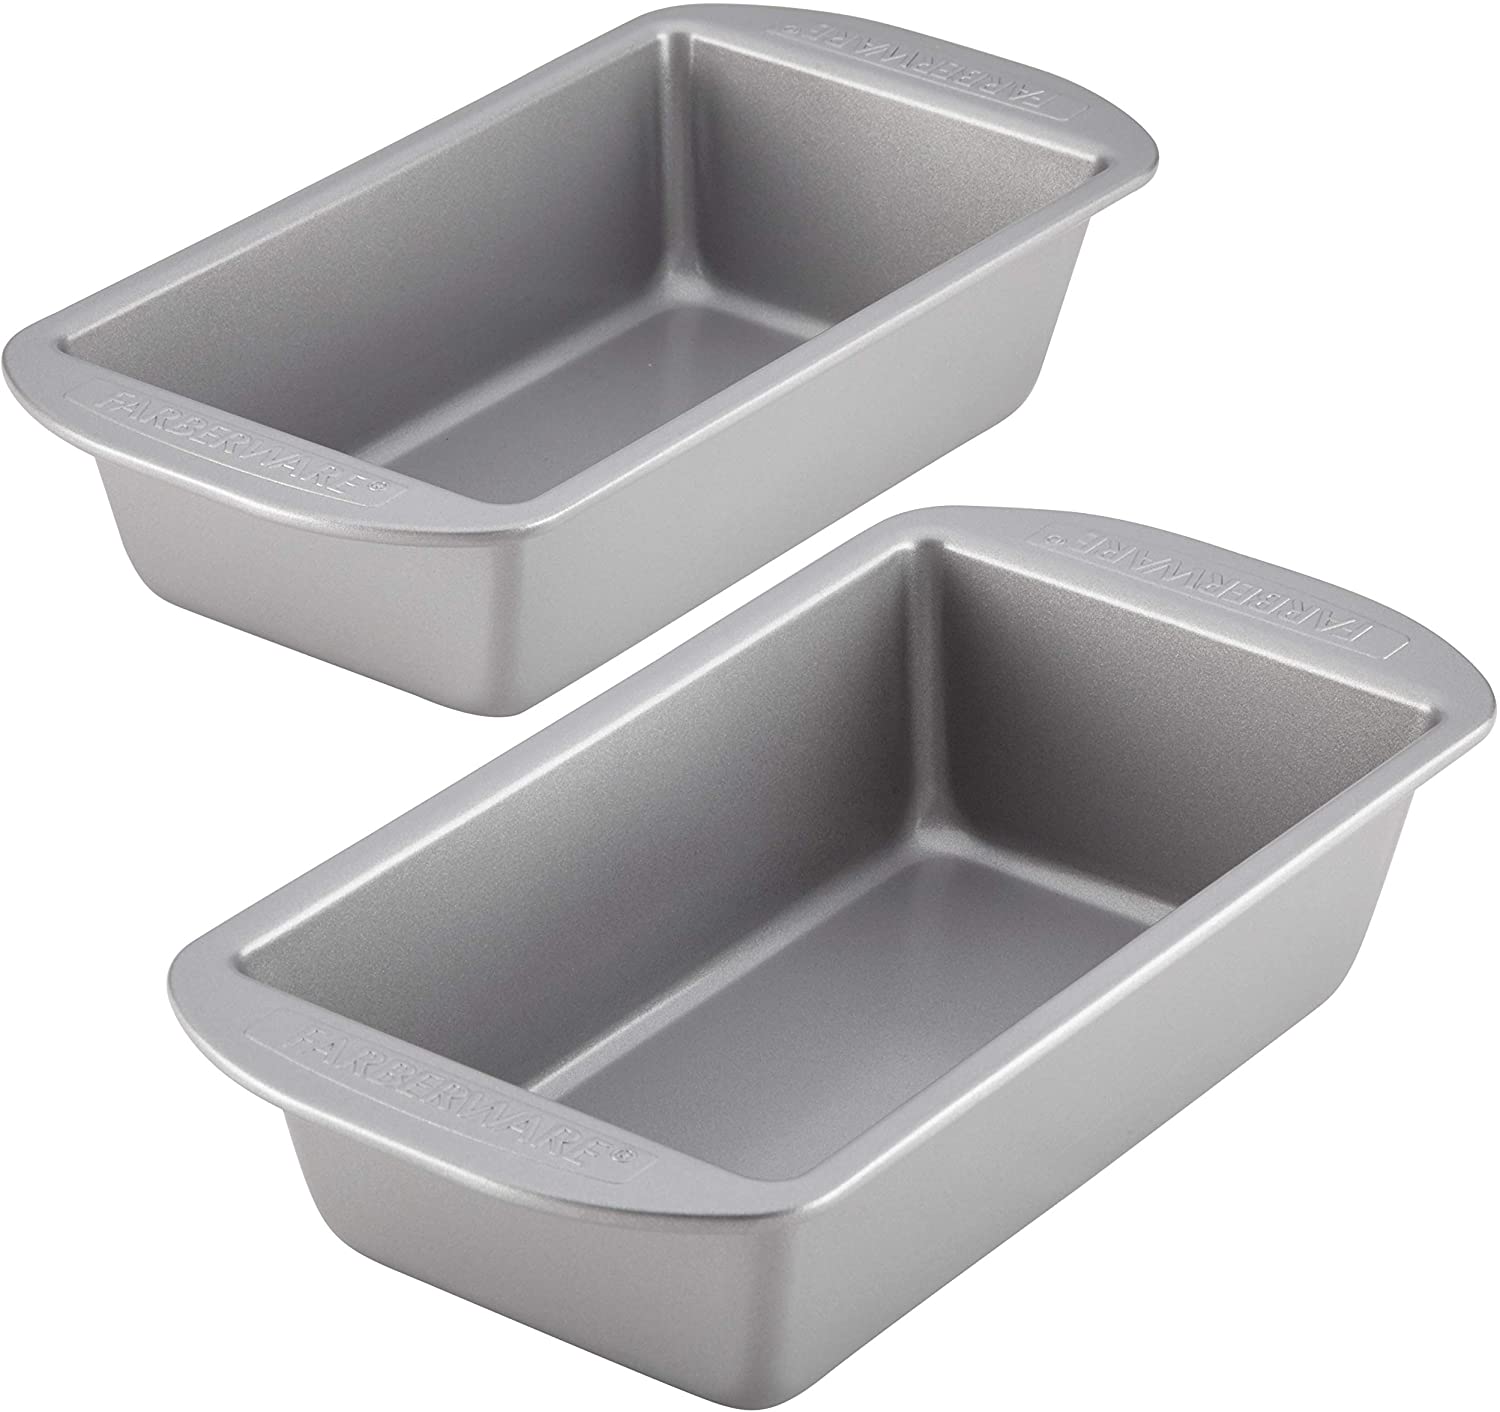 Farberware Nonstick Baking Bread And Loaf Pan, 2-Piece